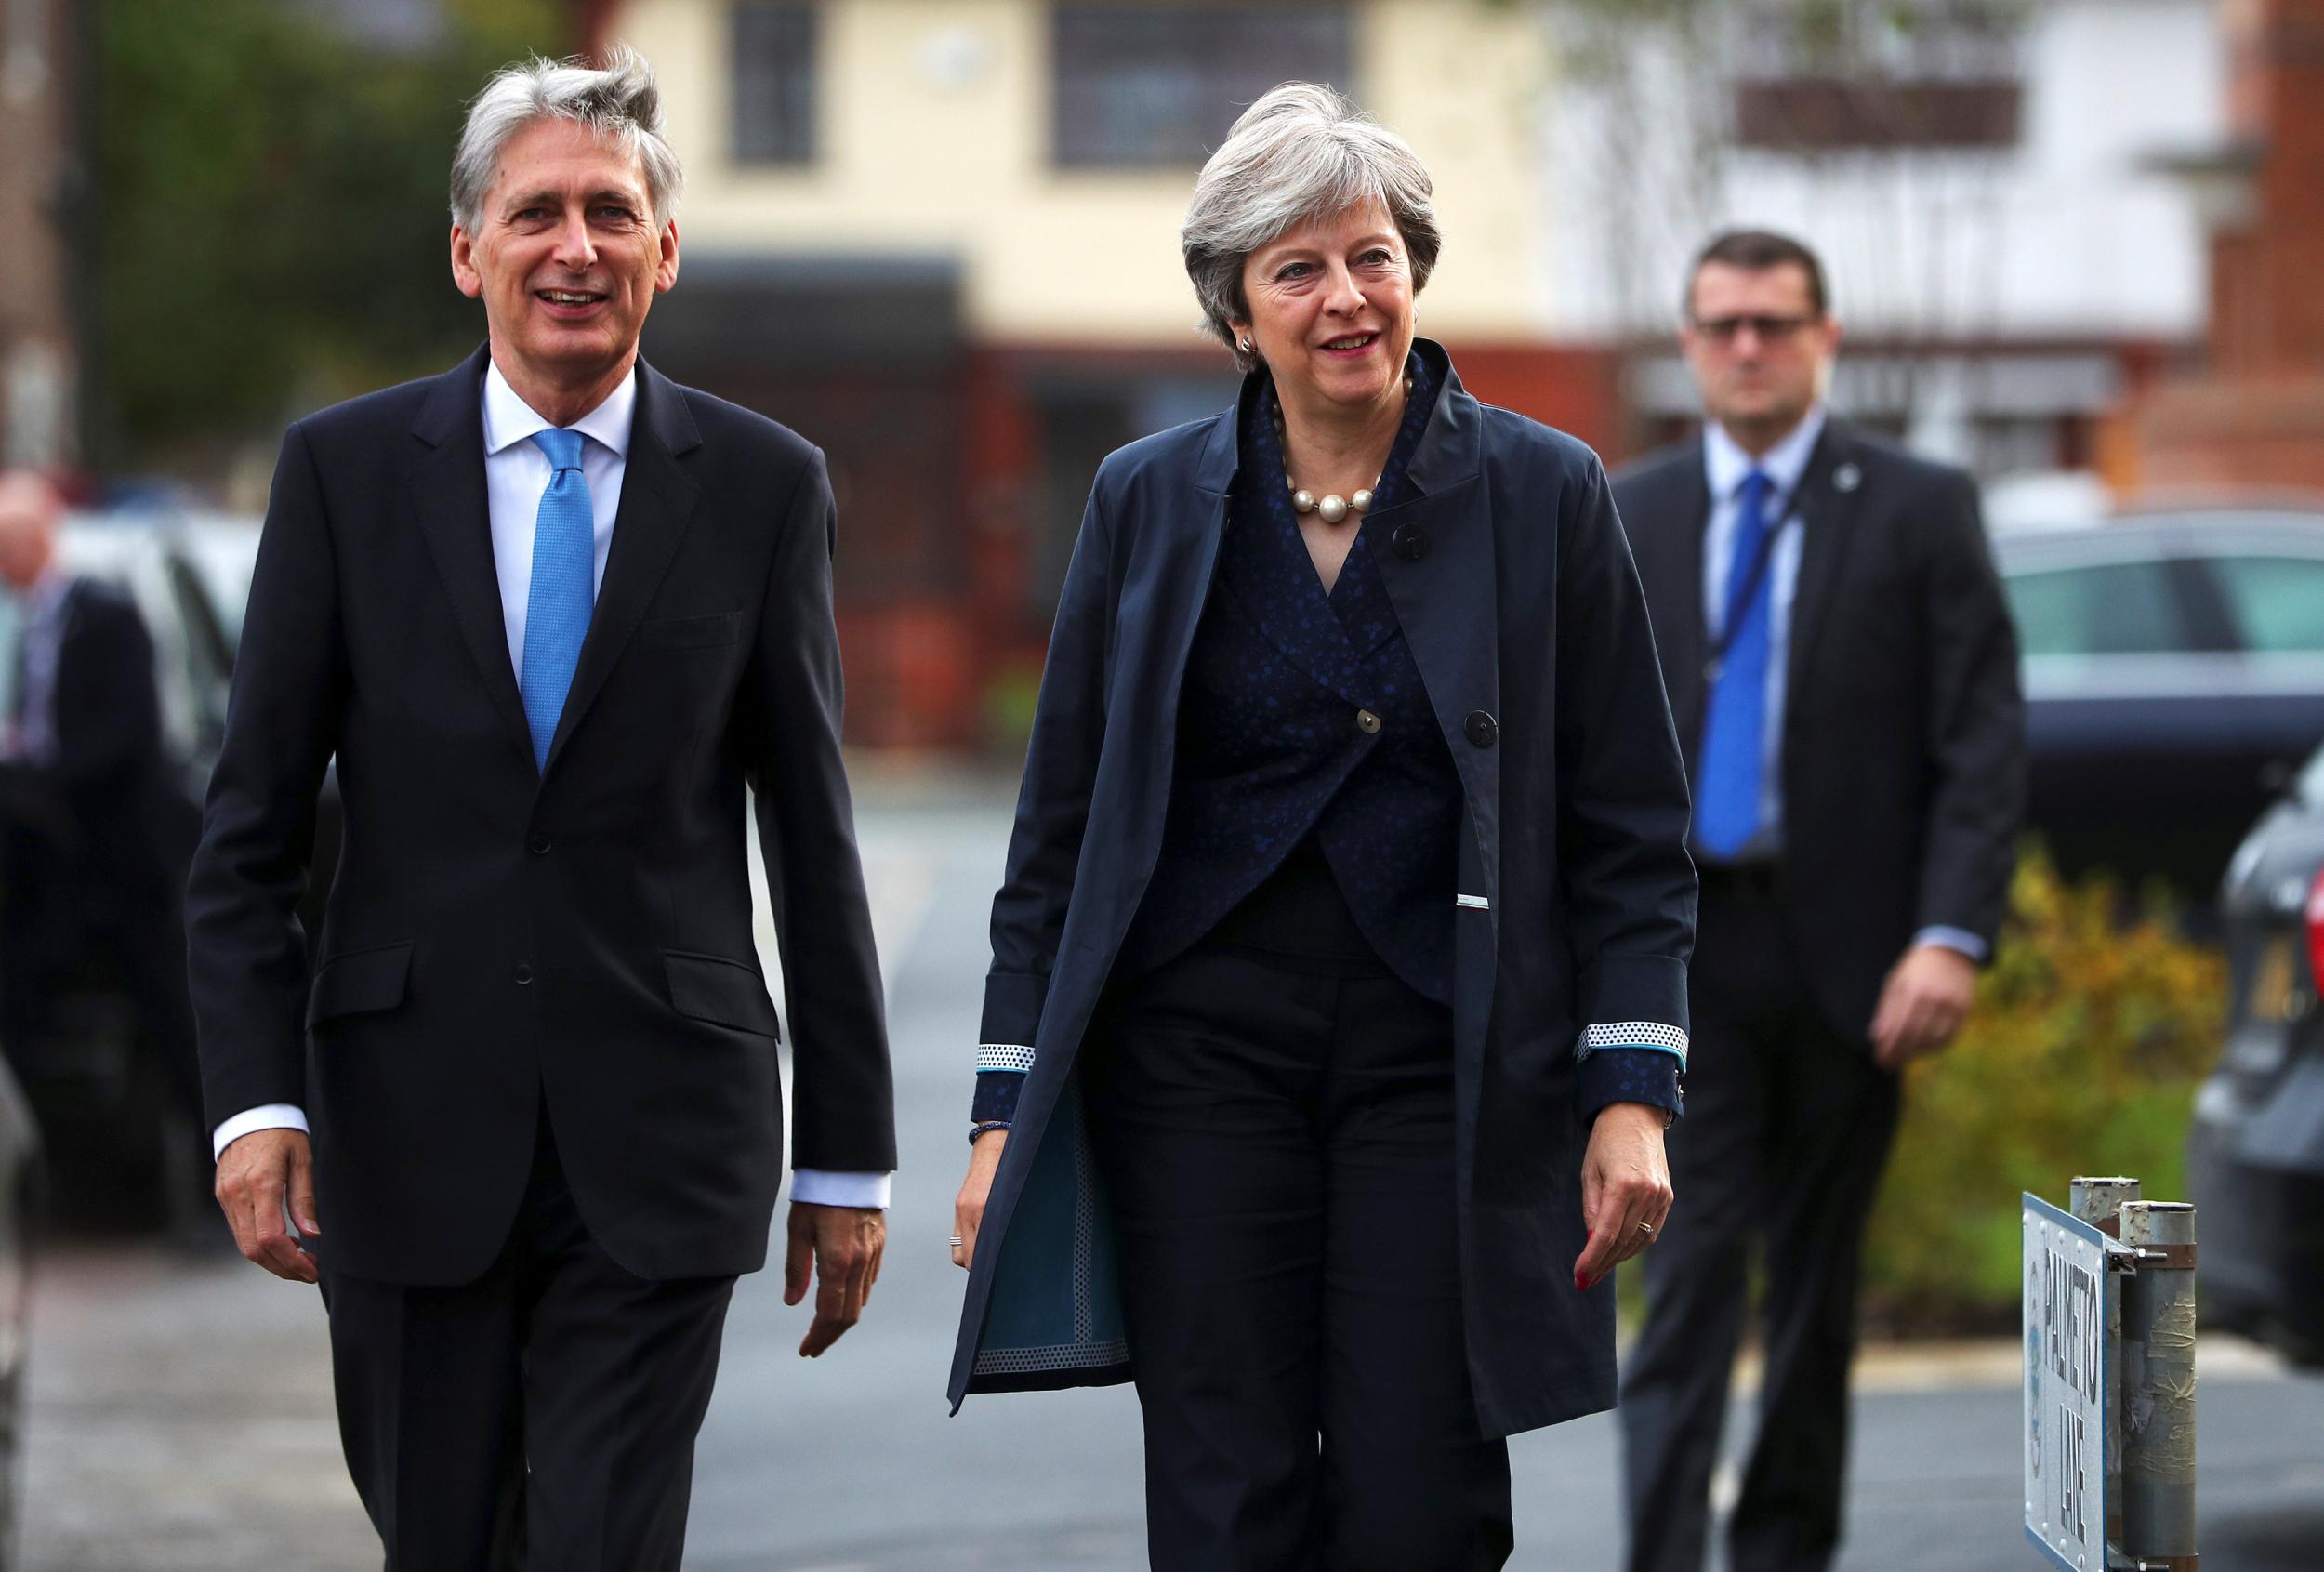 Chancellor Philip Hammond arrives at the Conservative party conference in Manchester, alongside Theresa May